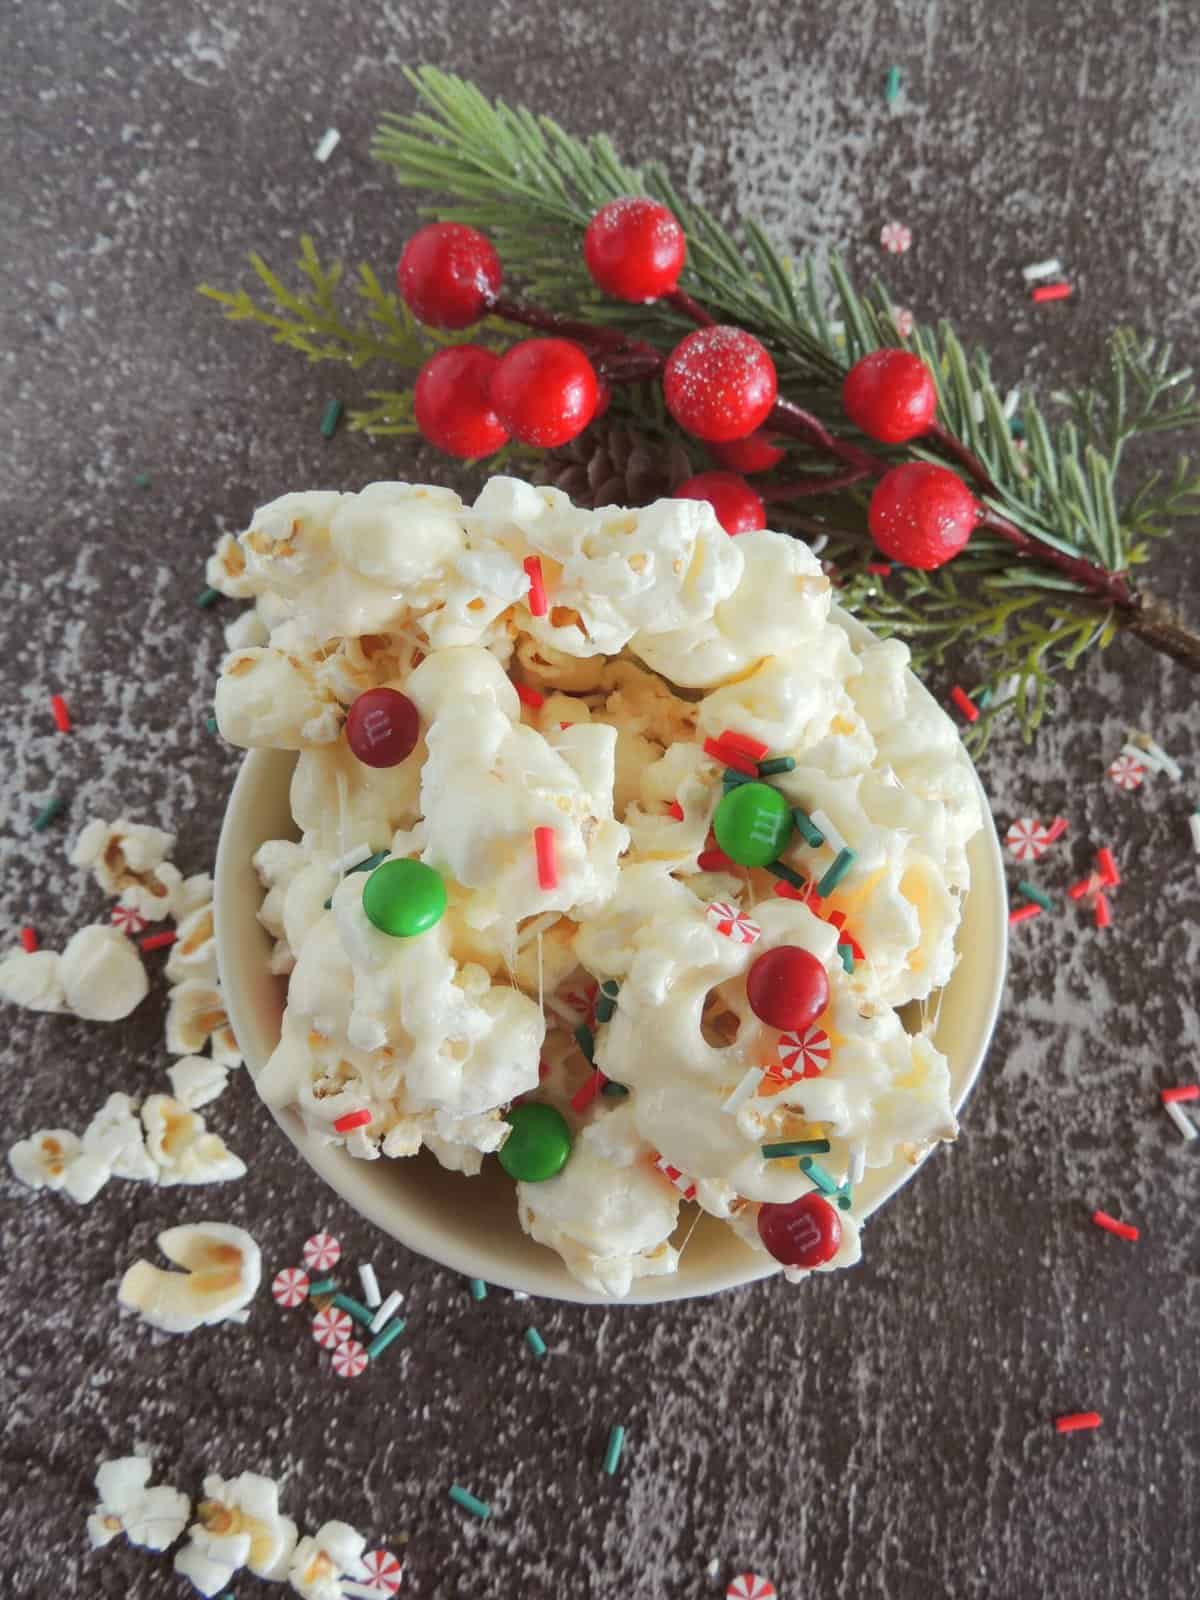 Christmas popcorn in a bowl with red and green M&M's